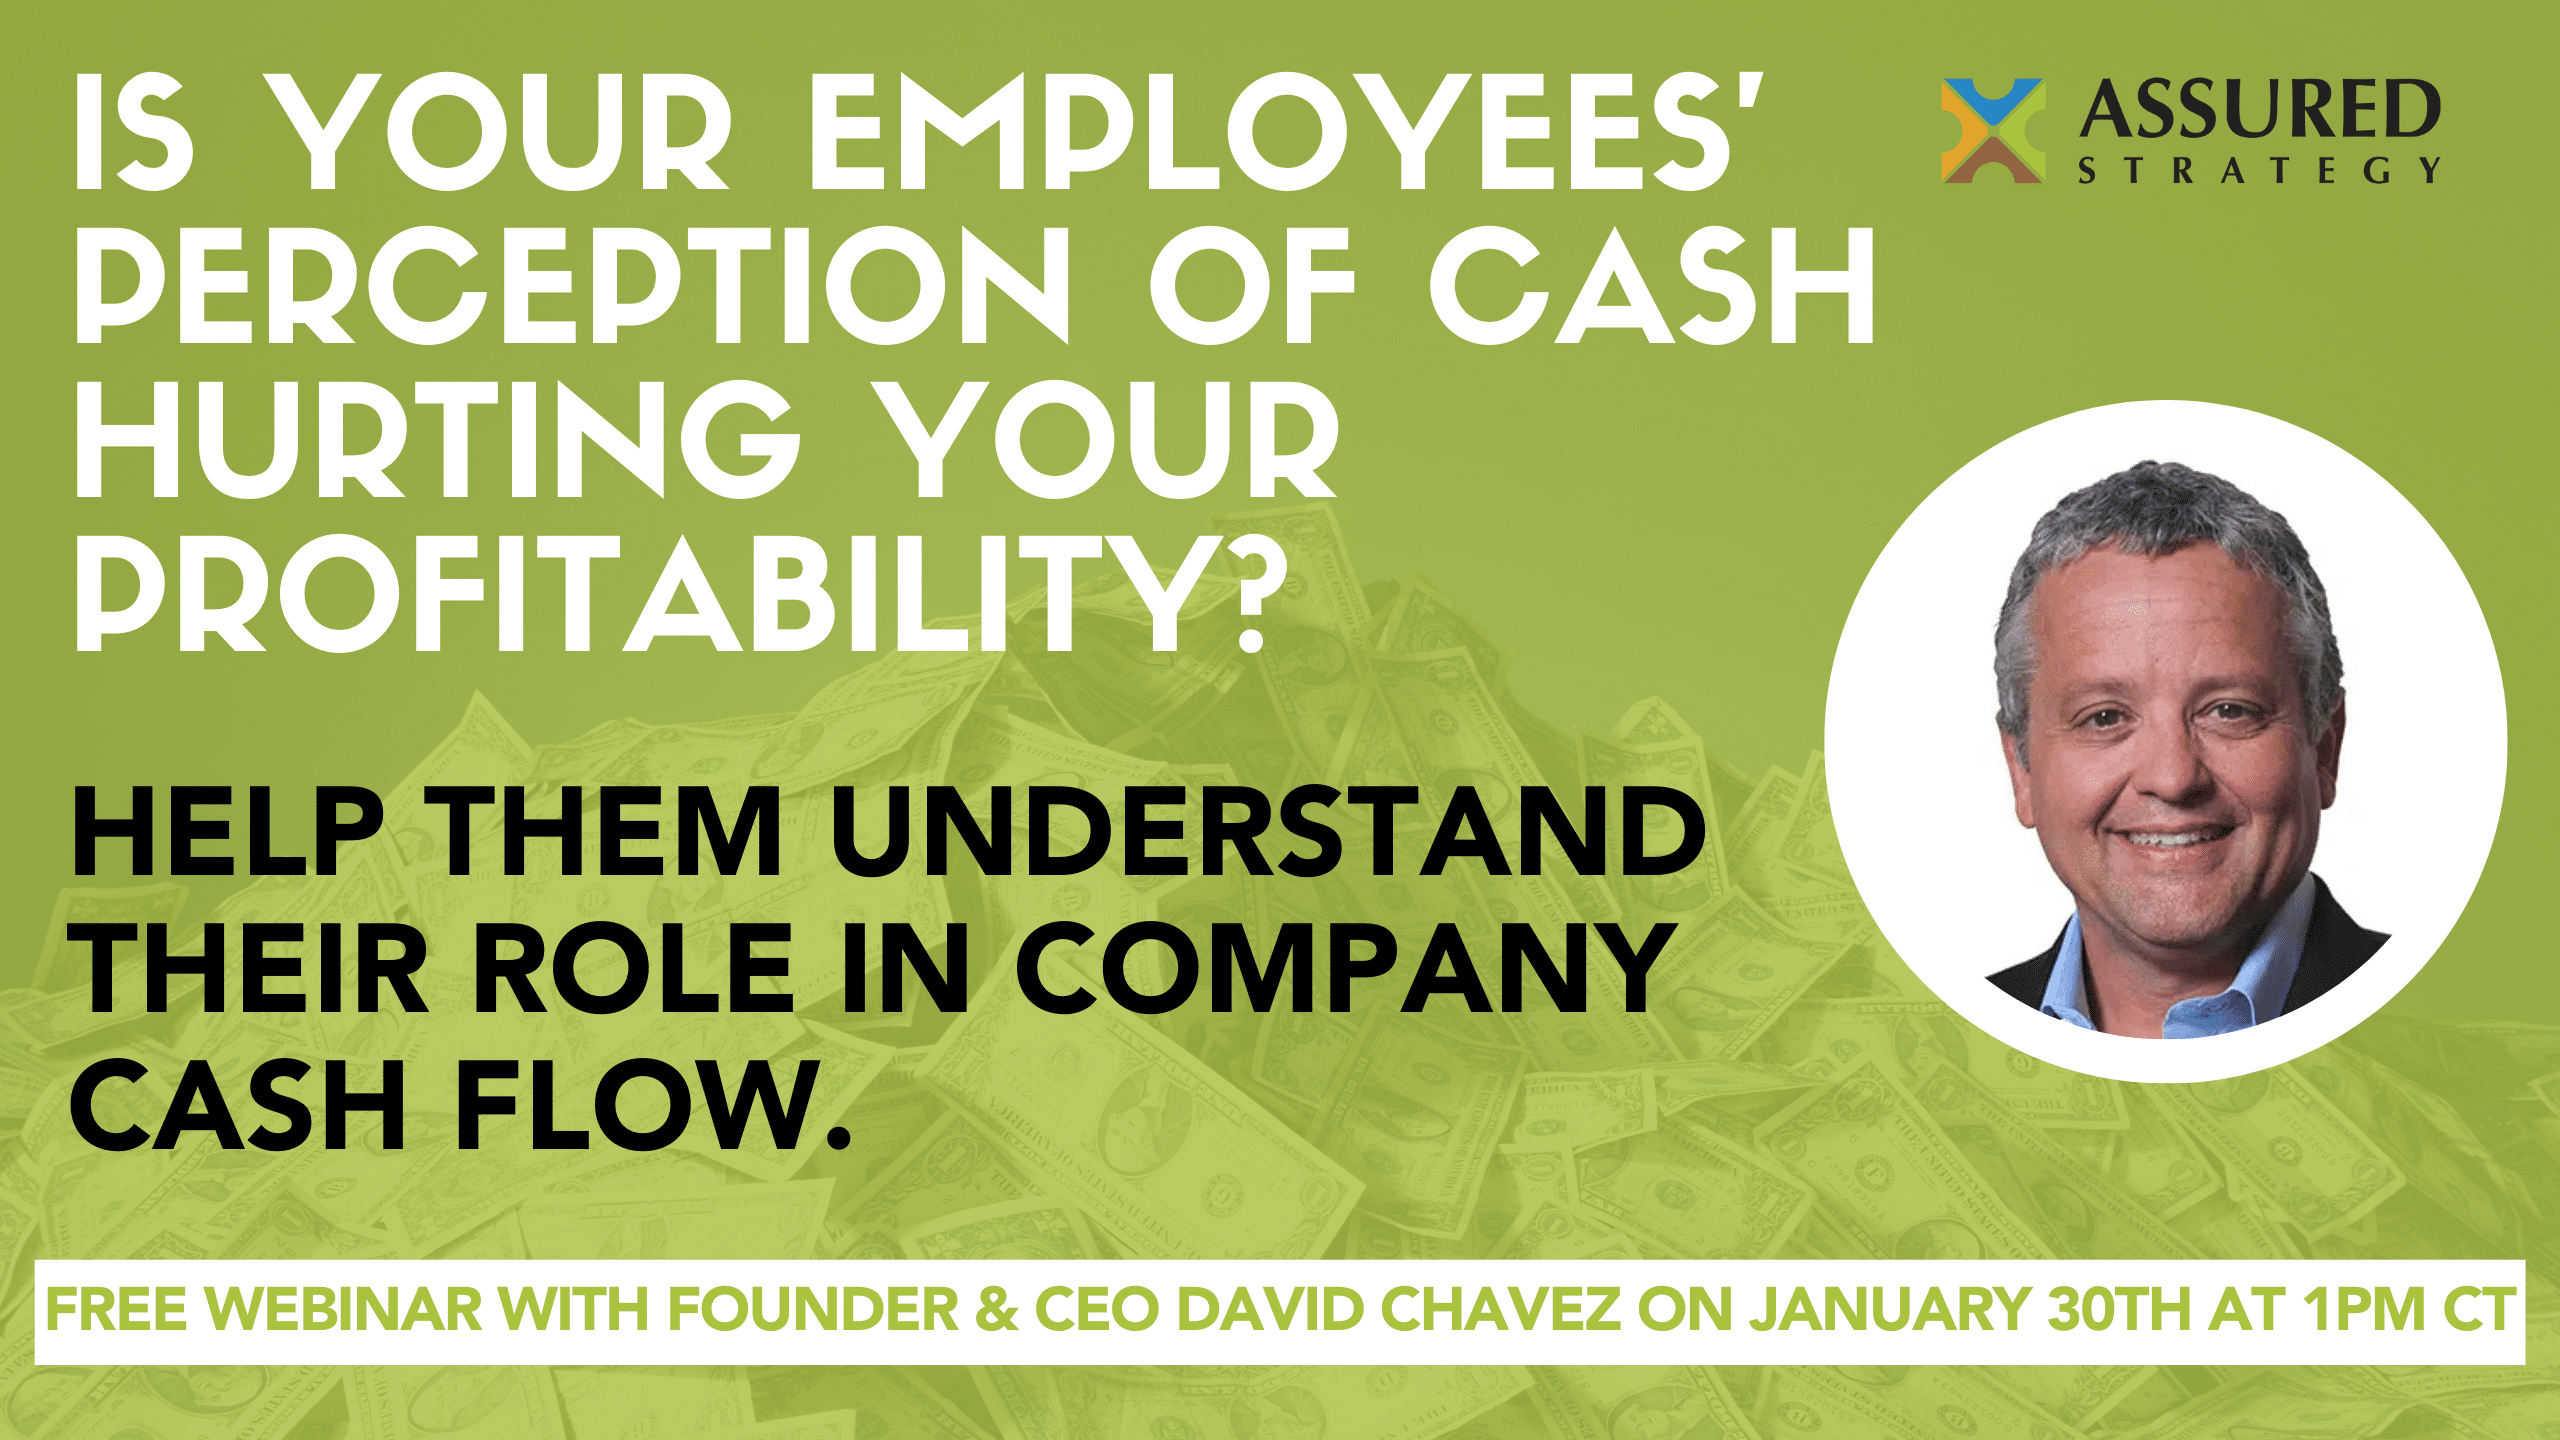 Free Webinar: Why Your Employees Think You Make Wheelbarrows of Money: A Look Into Building Cash in Your Company – January 30th from 1-2pm CT